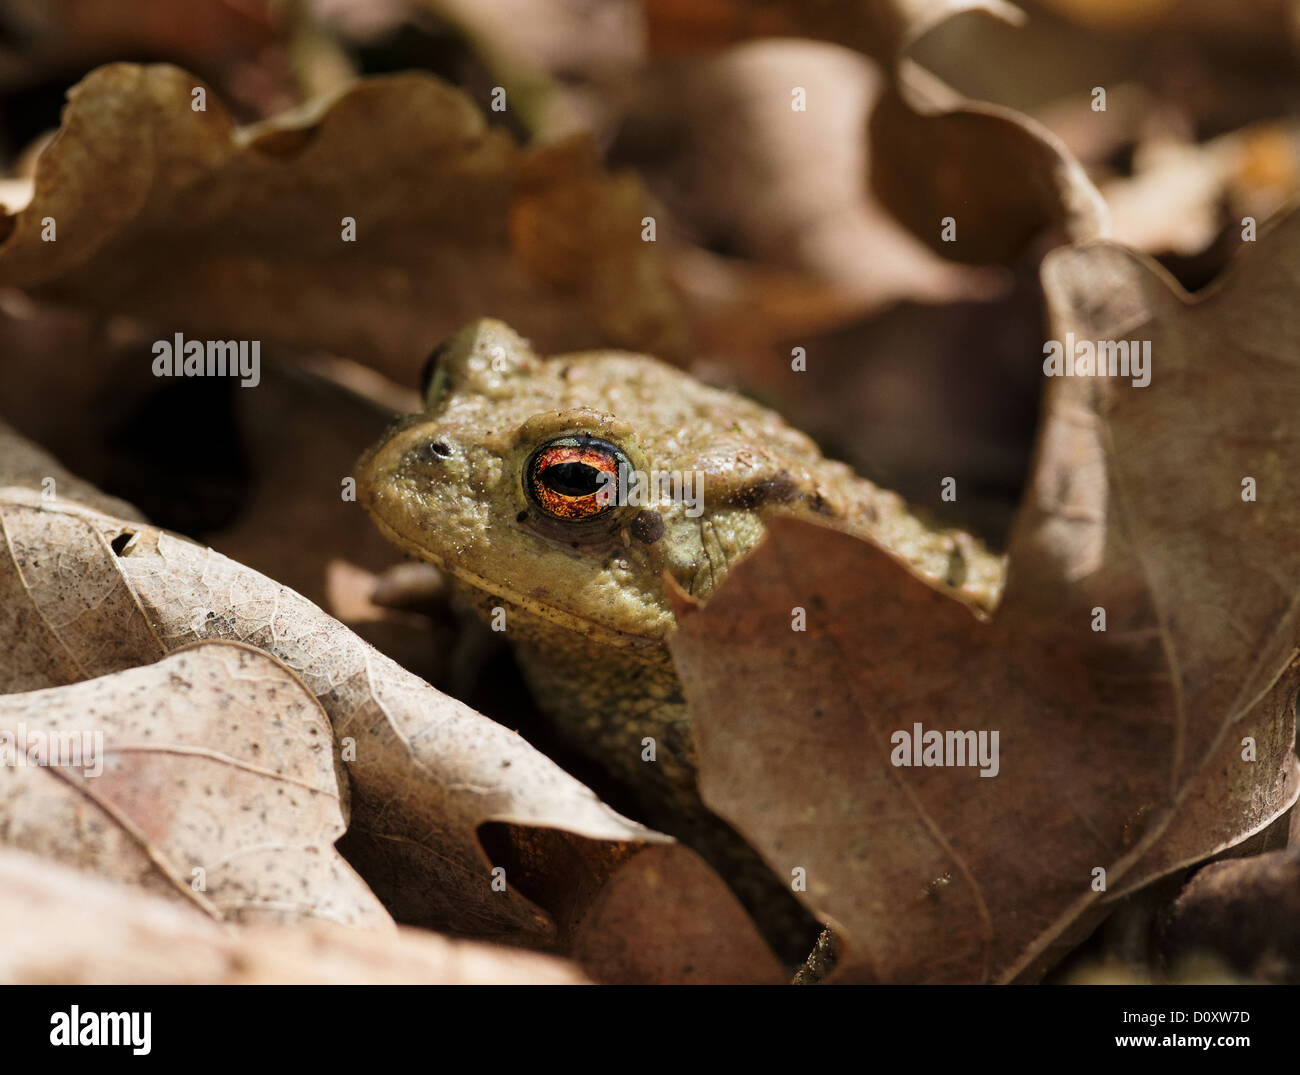 Amphibians, Bufo bufo, Burgdorf, toad, common toad, fauna, frog, frogs, canton, Bern, toad, Amphibians, nature, Switzerland, Eur Stock Photo